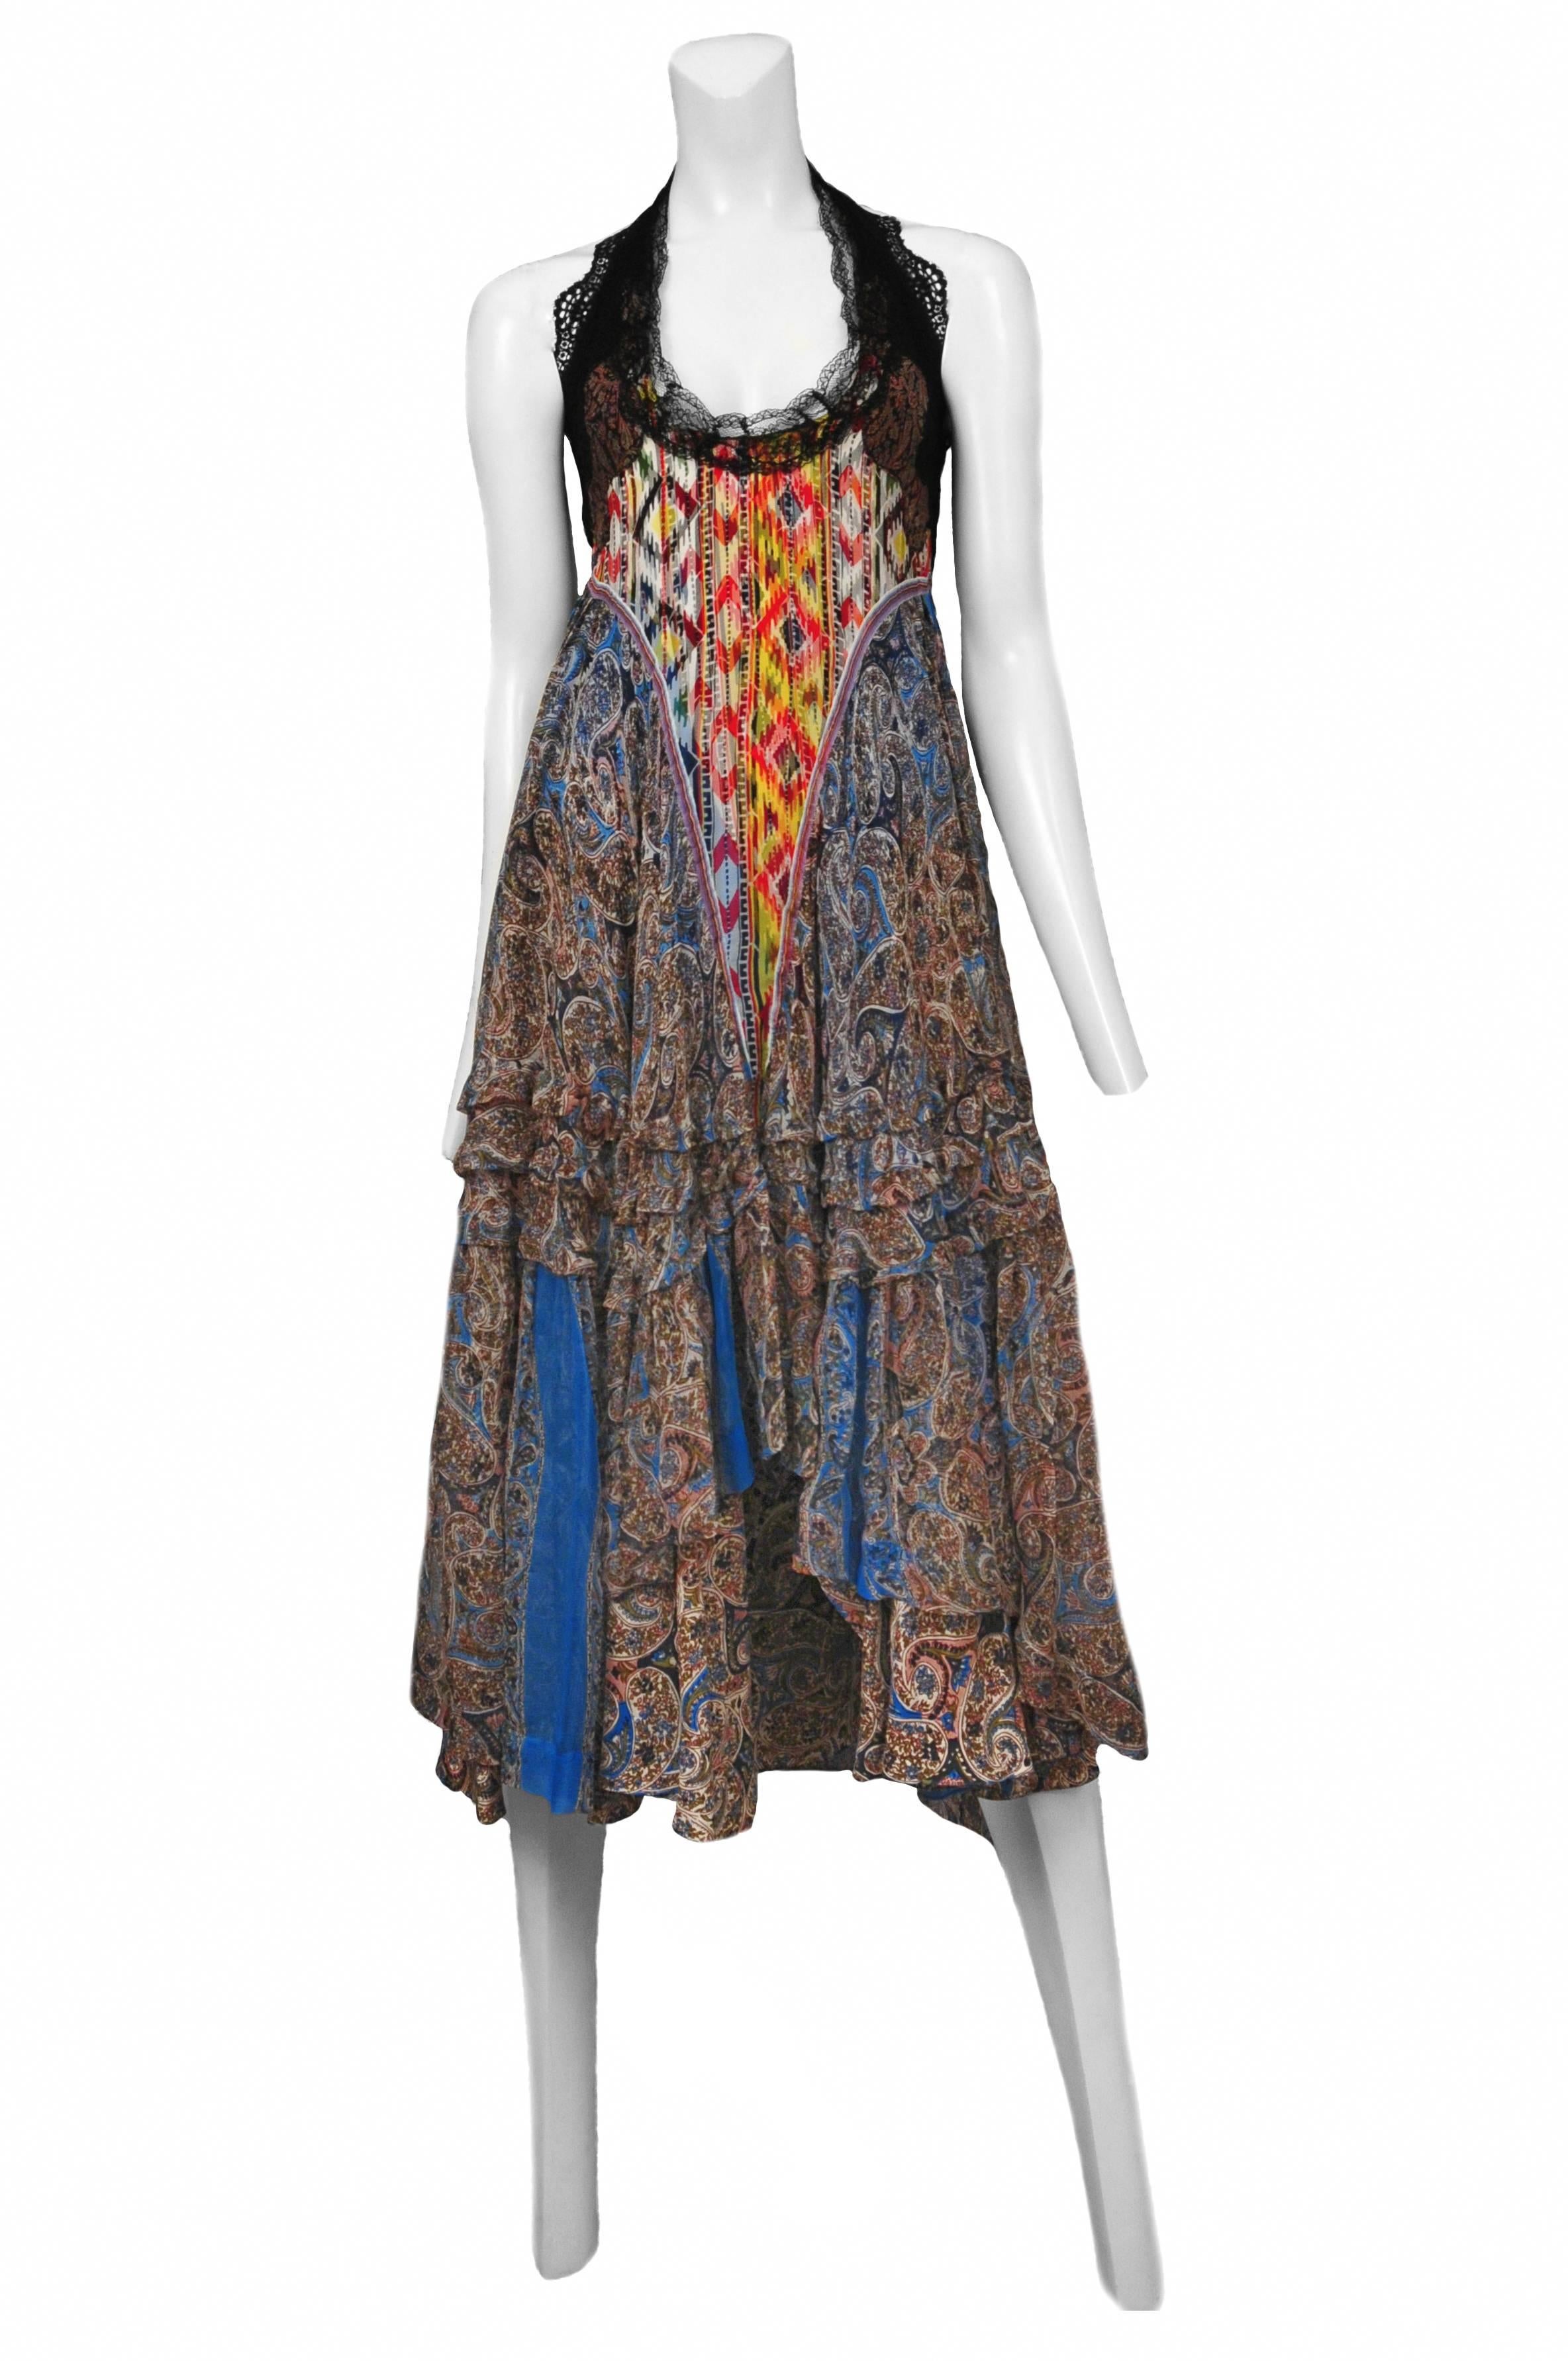 Vintage Nicolas Ghesquière for Balenciaga printed chiffon bohemian style party dress featuring a halter neck, full shirt with insets and lace trim. Circa 2005.